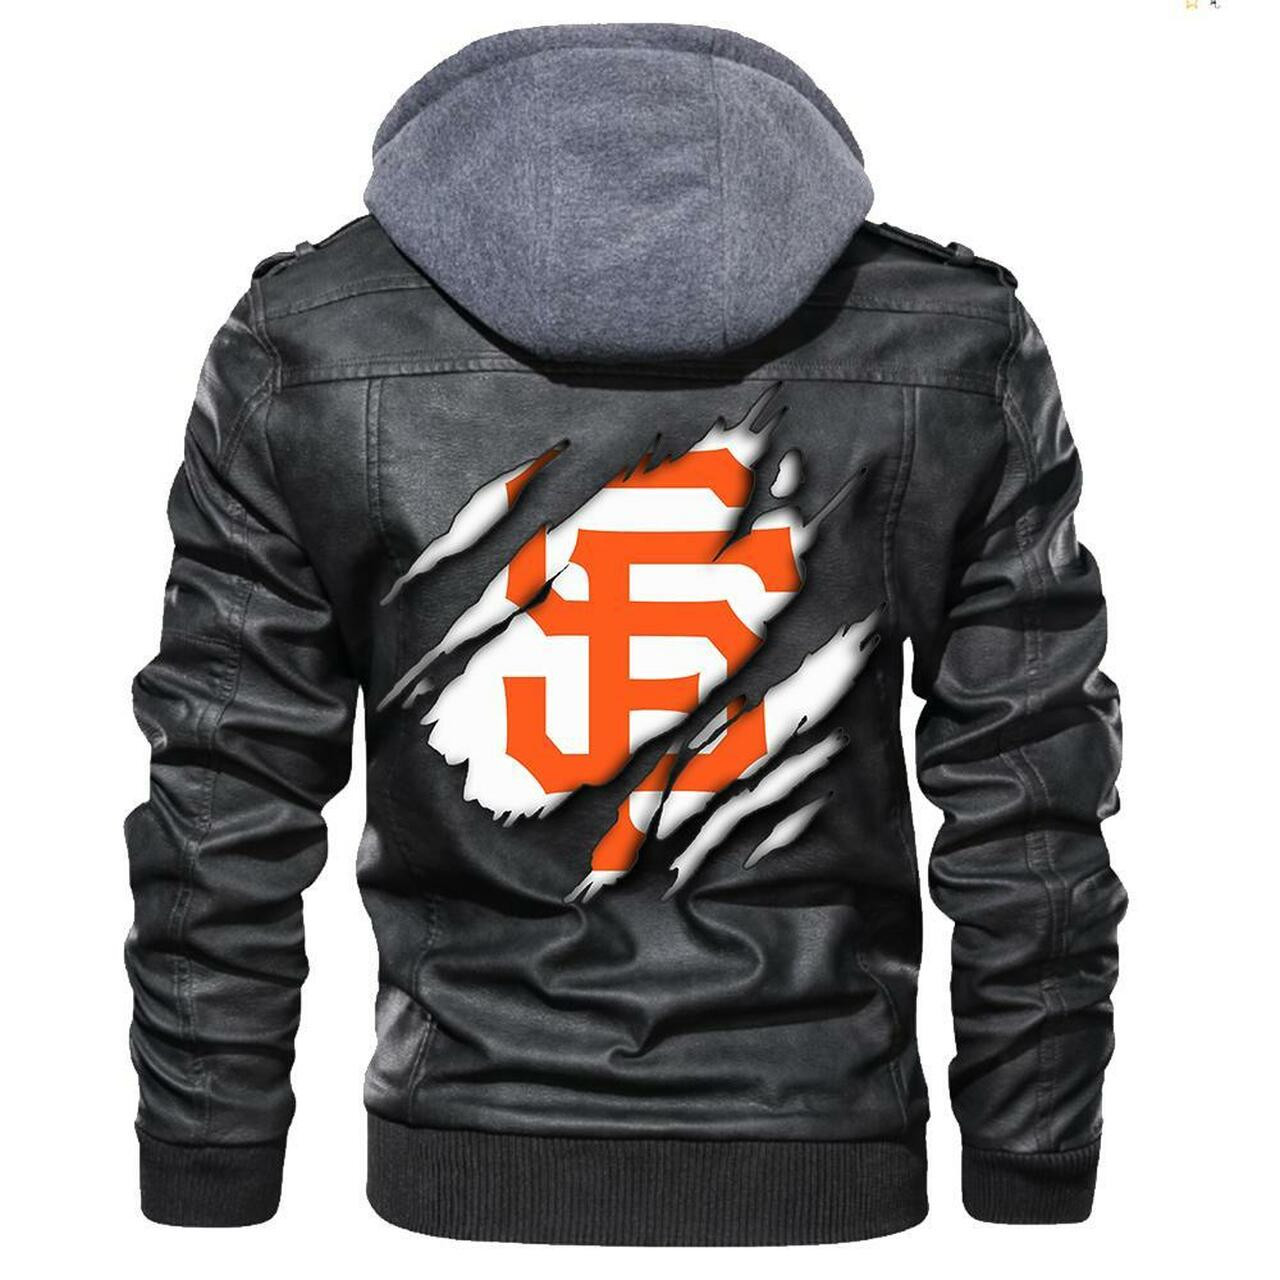 Are you looking for a great leather jacket? 216